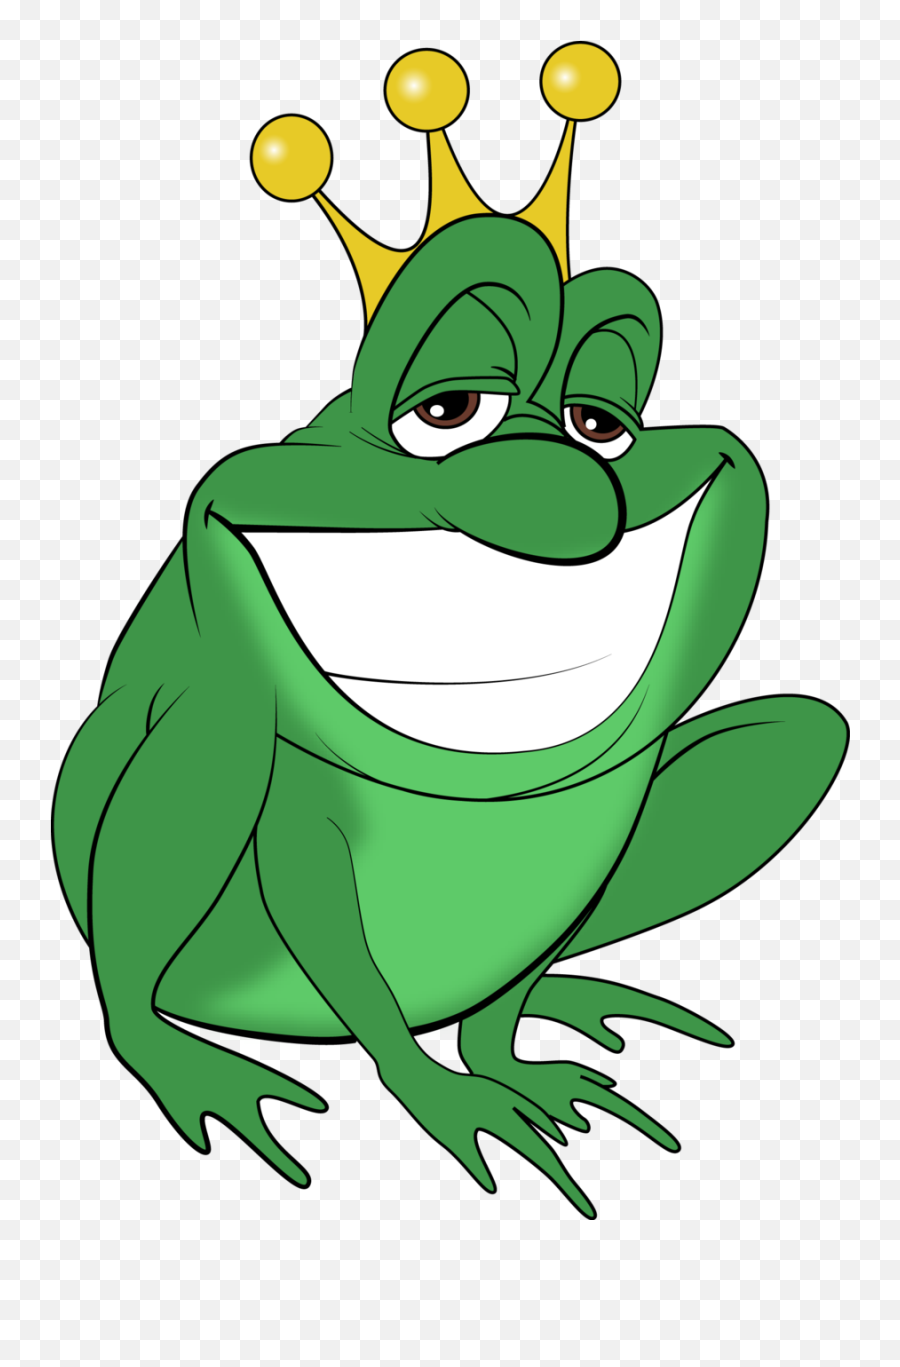 Drawing Of A Green Frog With A Crown Free Image Download Emoji,With A Crown Emotion